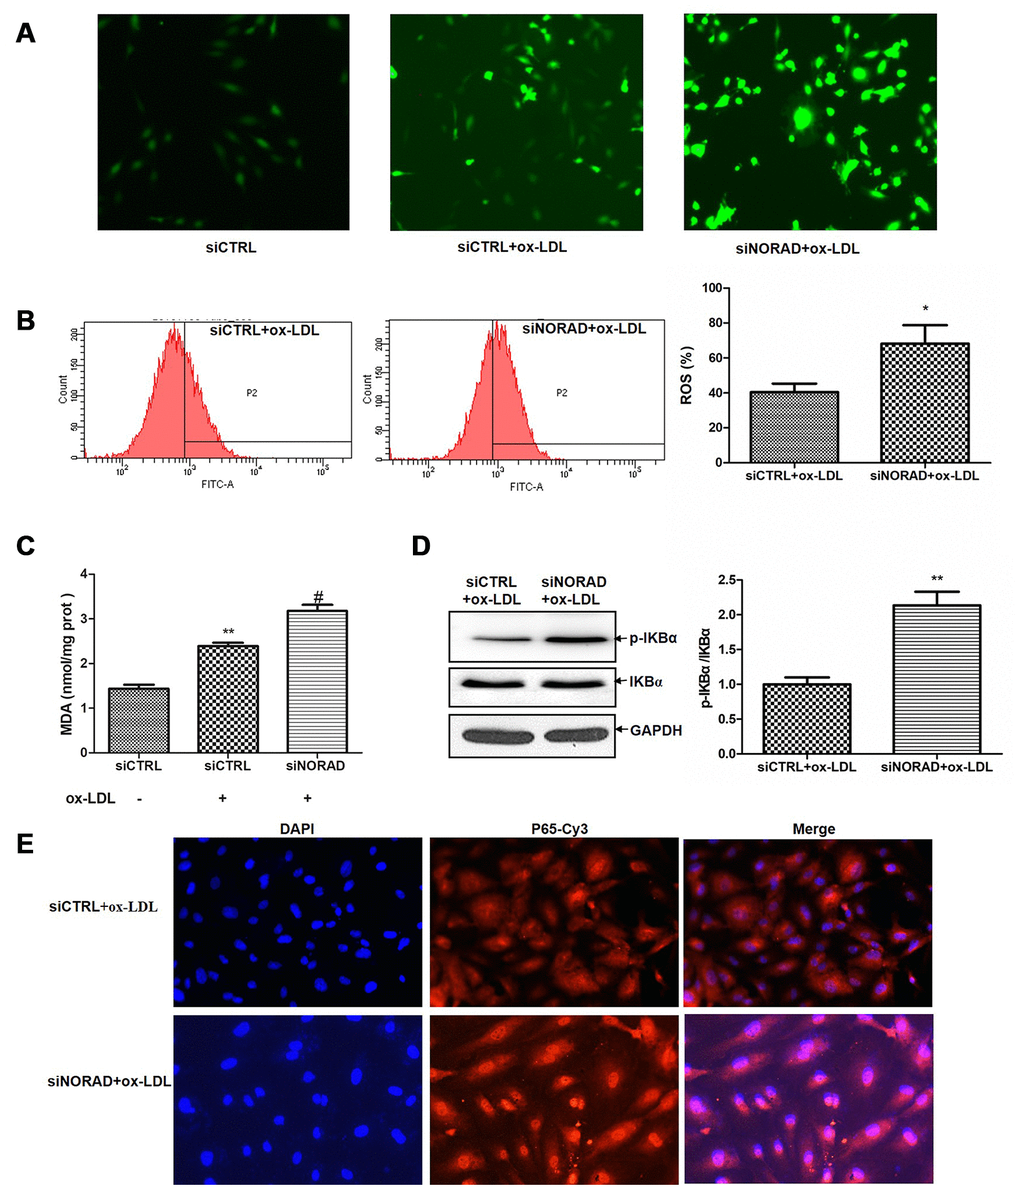 NORAD-knockdown aggravates ox-LDL-induced oxidative stress and p-IKBα expression level in HUVECs. HUVECs were transfected with siNORAD or scrambled siCTRL. After transfection for 24 h, the cells were treated with 60 μg/mL ox-LDL for 24 h. (A) NORAD knockdown aggravated ox-LDL-induced ROS production. HUVECs were treated with 60 μg/mL ox-LDL for 3 h and incubated with DCF-DA for 25 min. The ROS levels were observed under an inverted fluorescence microscope. Images were representative of three separate experiments (n = 3). (B) Flow cytometry was used to detect the intracellular ROS levels. Data were from three separate experiments and described as mean ± SD. *P C) MDA content in HUVECs treated with 60 μg/mL ox-LDL for 24 h. Data were shown as mean ± SD of three separate experiments. **P #P D) NORAD-knockdown increased the p-IKBα expression observed through western blot. The ratio of p-IKBα to IKBα was analyzed with ImageJ. Values were shown as mean ± SD (n = 3). **P E) NORAD-knockdown increased NF-κB nuclear translocation by immunofluorescence. p65 was stained red with Cy3. Nuclei were stained blue with DAPI. Co-localization of p65 with nucleus is shown in purple.